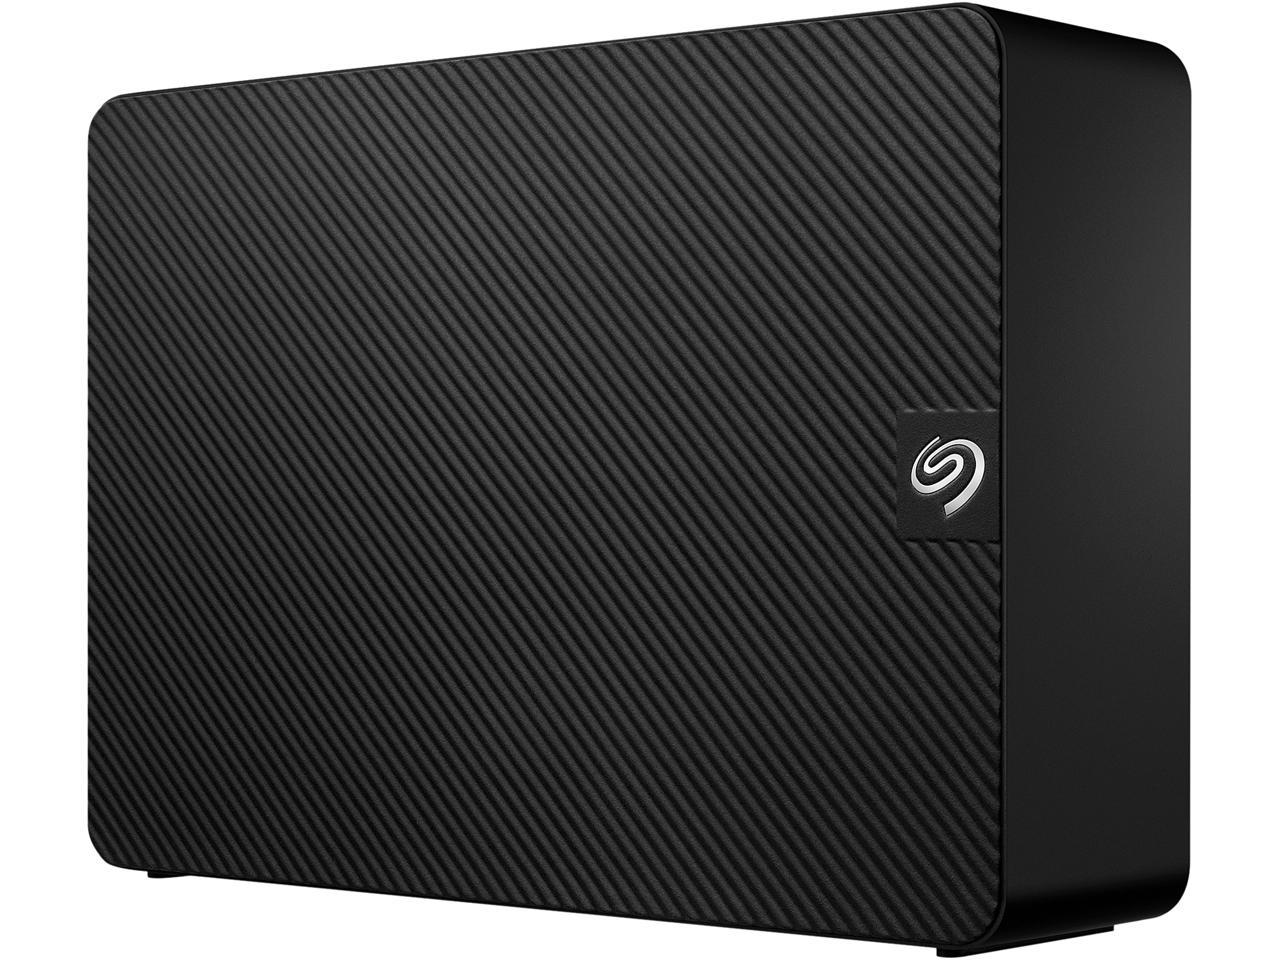 16TB Seagate Expansion External Hard Drive HDD - USB 3.0, with Rescue Data Recovery Services $250;  12TB/ $200